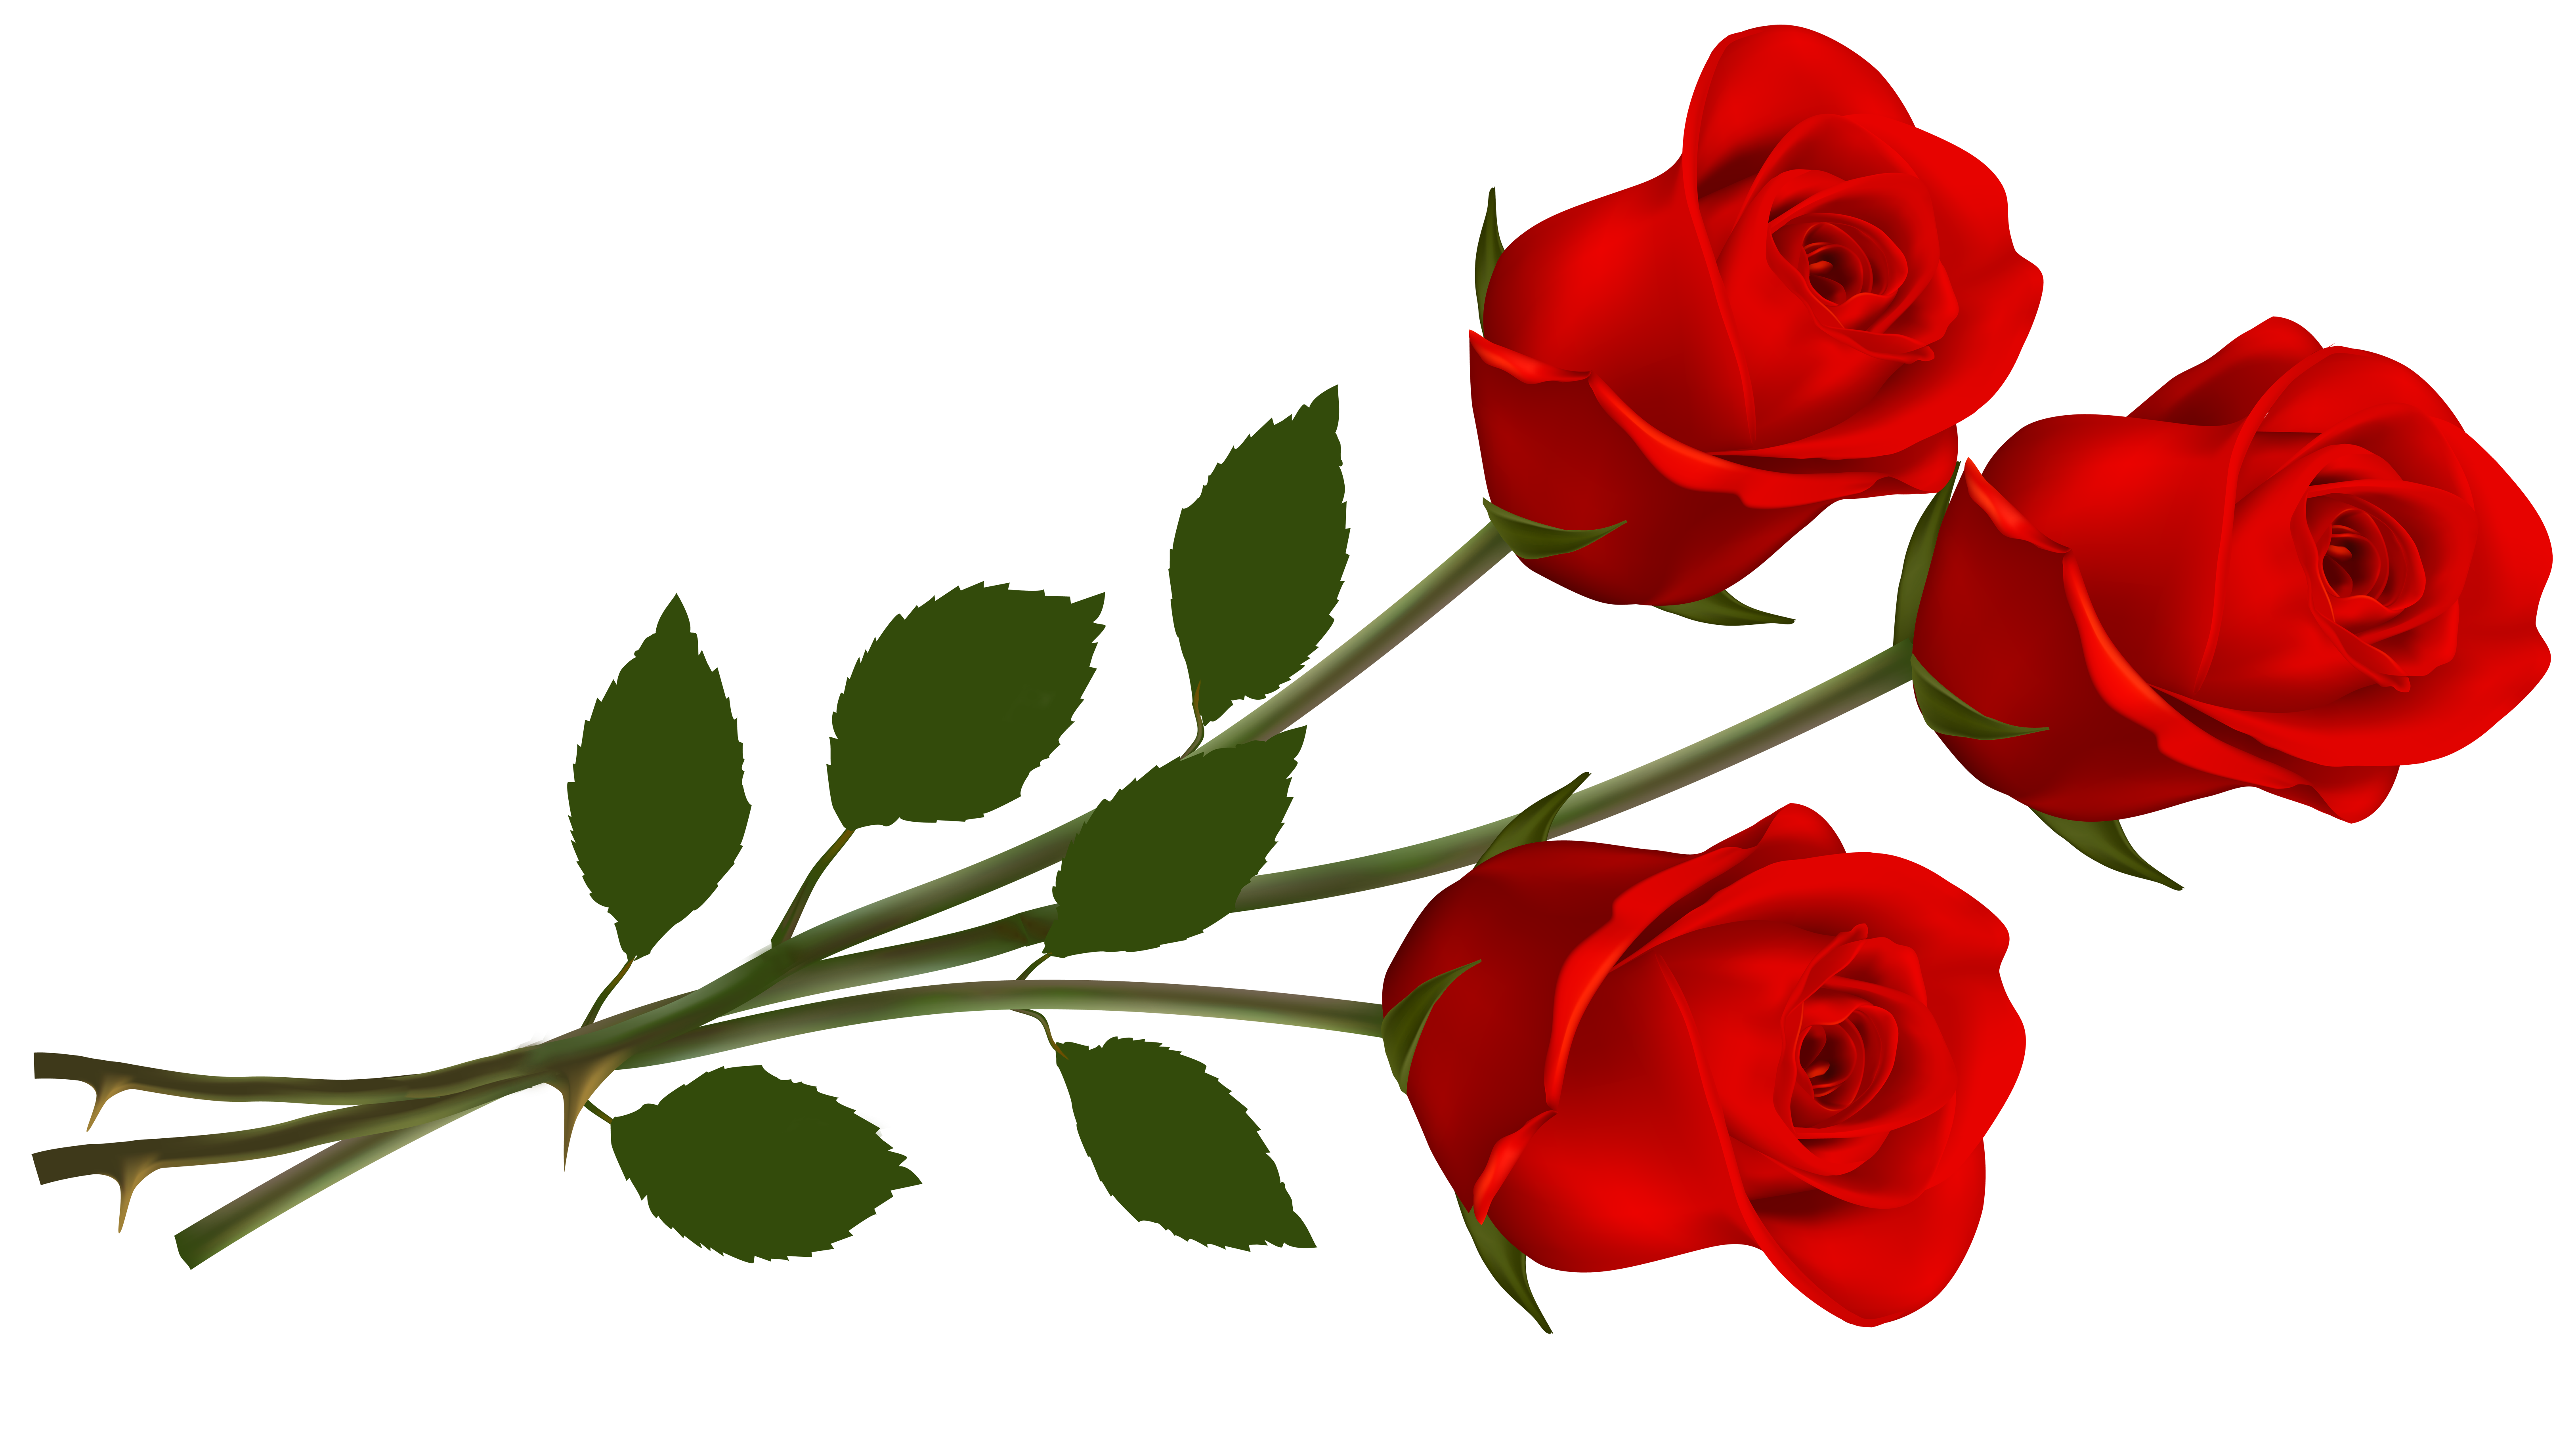 Red Rose Clipart Image